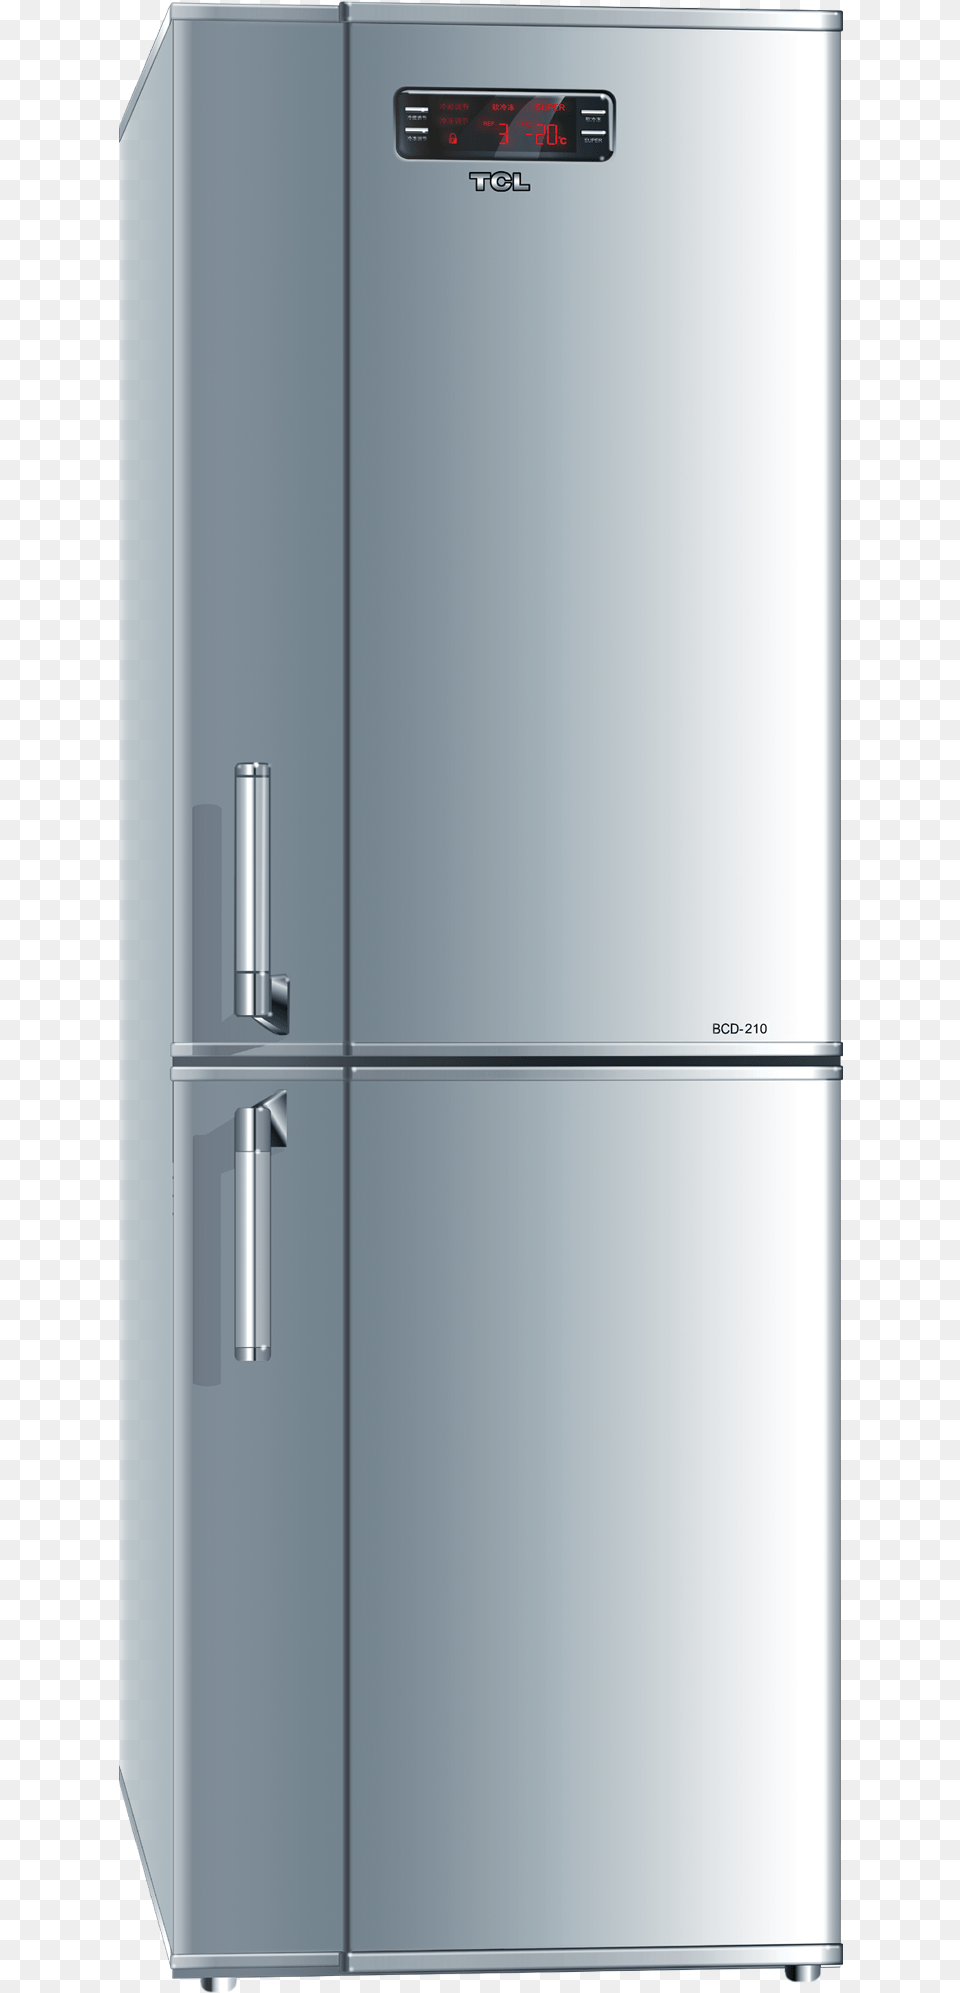 Fridge Vector Top View Refrigerator, Device, Appliance, Electrical Device Png